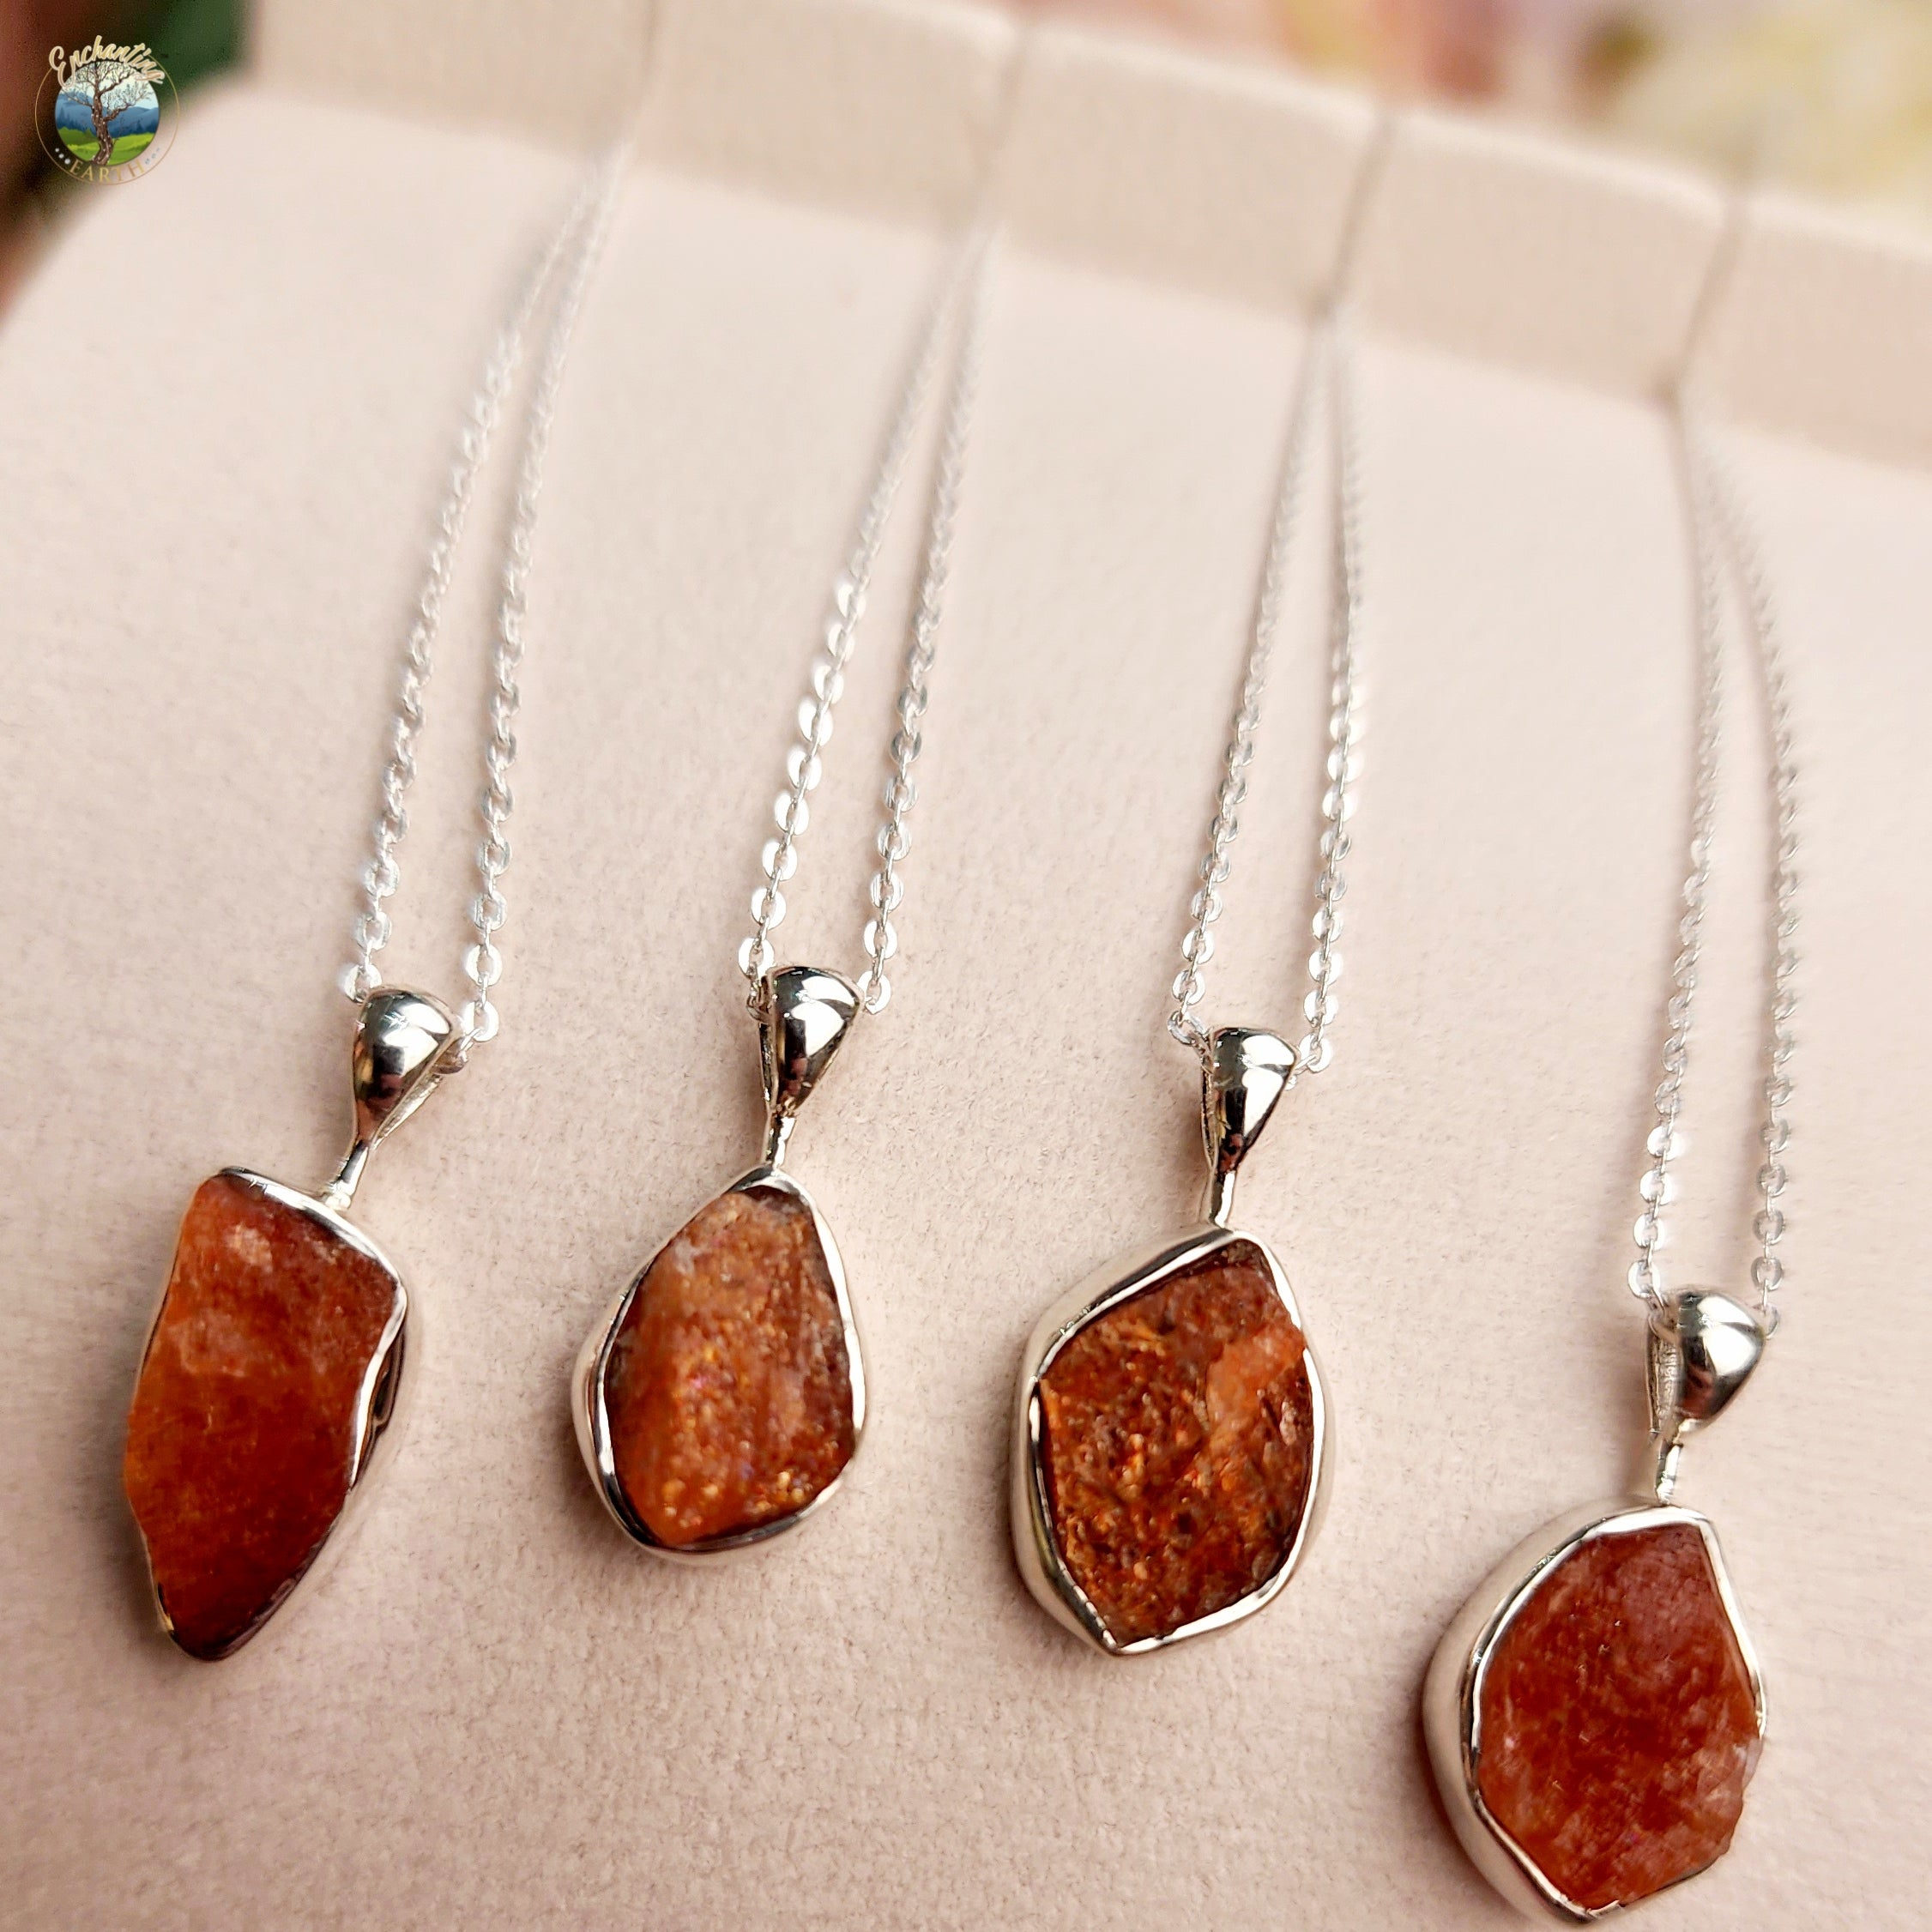 Sunstone Raw Necklace .925 Silver for Confidence, Leadership and Strength